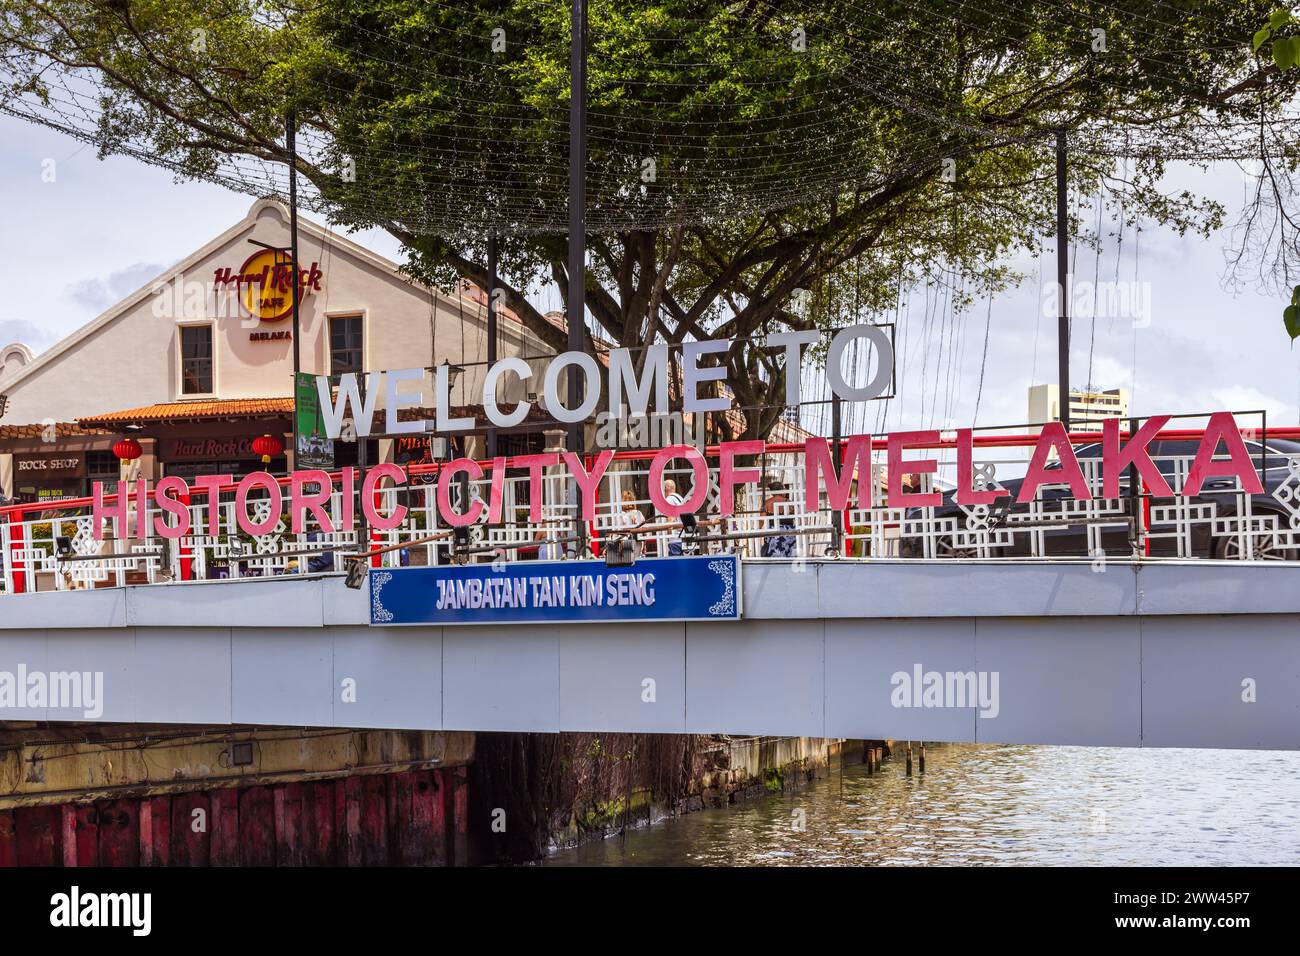 Welcome to historic city of Melaka sign on old Tan Kim Seng Bridge in the city of Malacca, Malaysia. Stock Photo